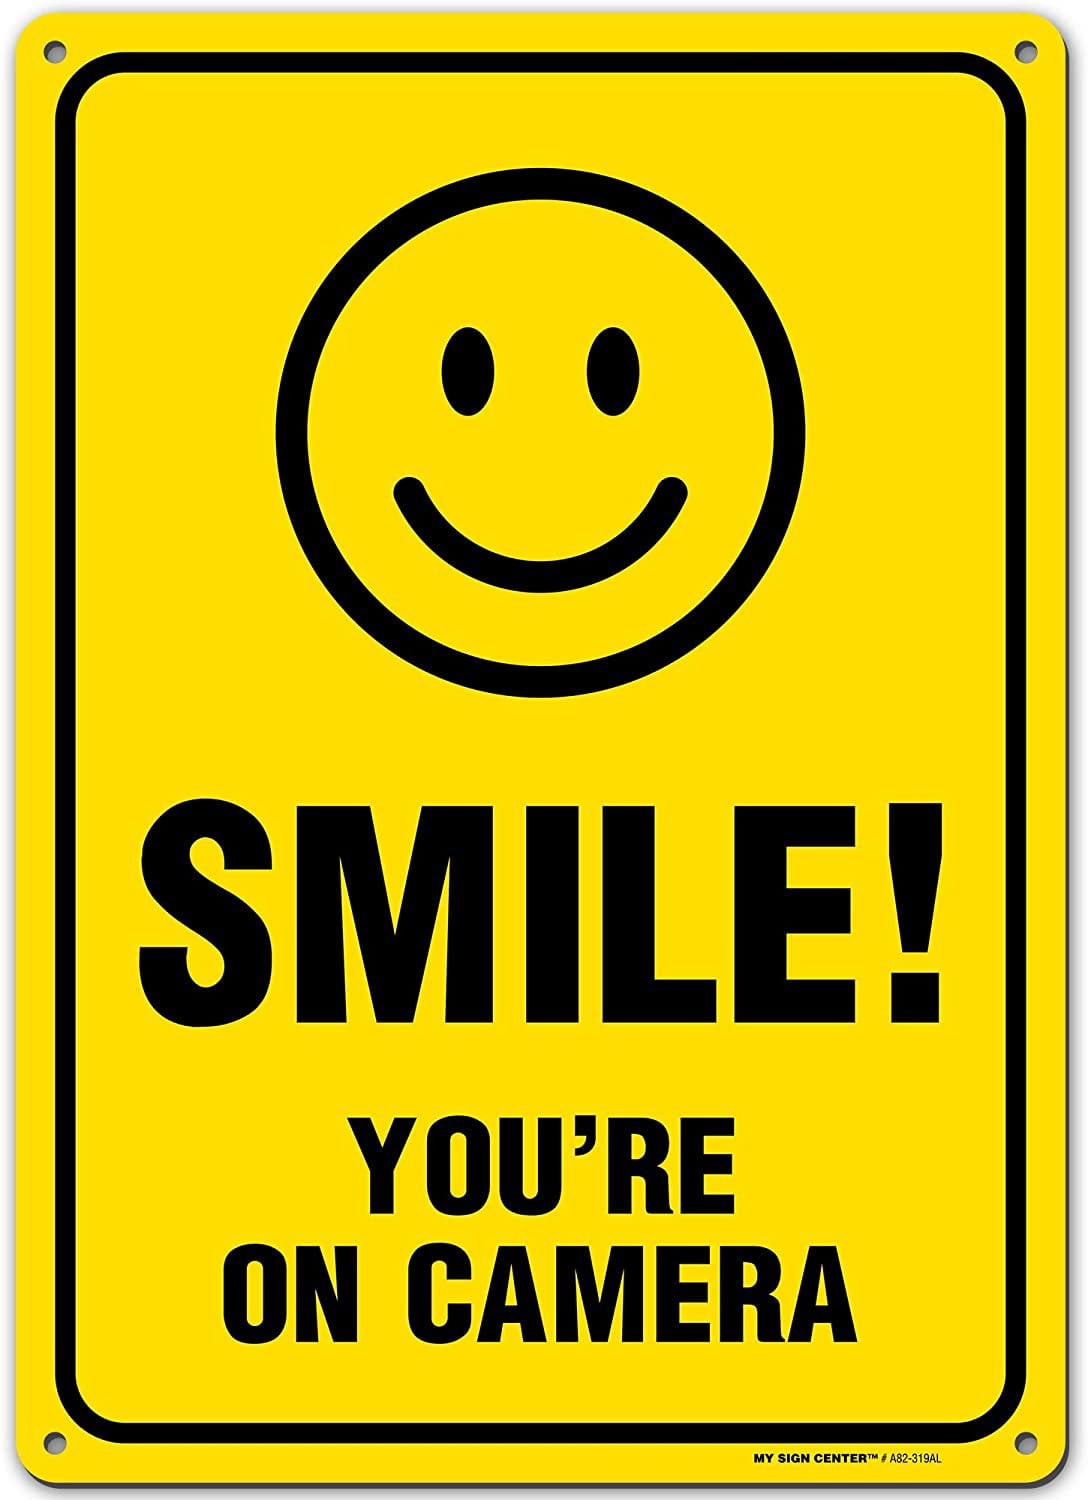 Smile You Are On Camera Warning Wall Art Funny Decor Novelty Aluminum Metal Sign